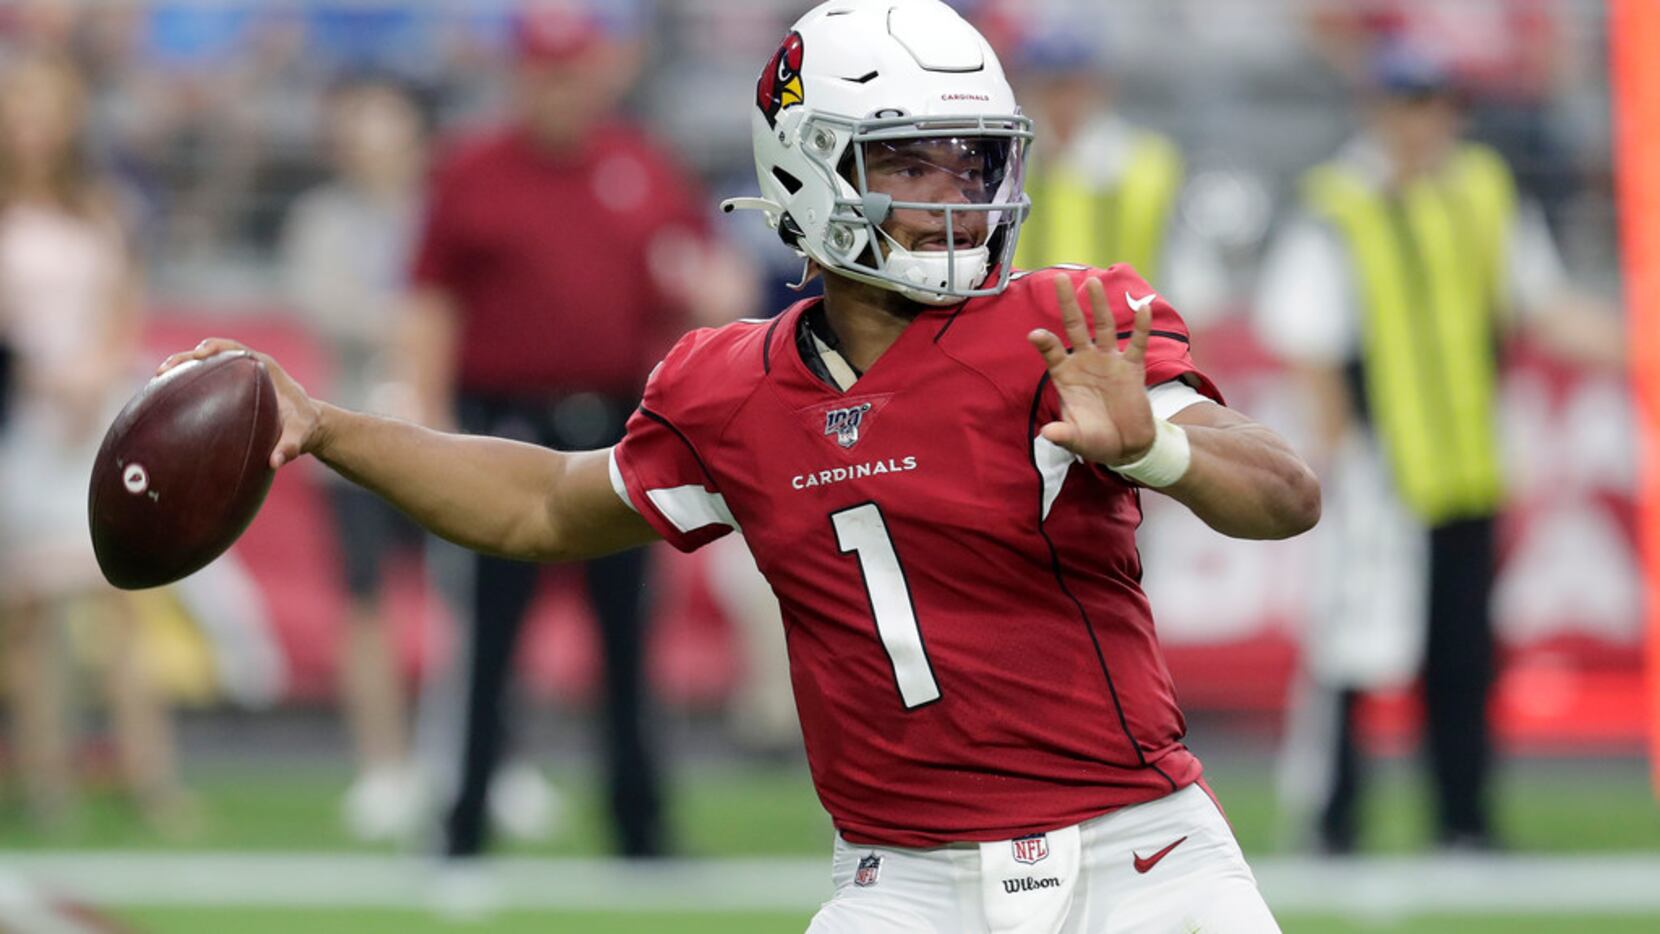 Kyler Murray leads 18-point comeback to force tie in NFL debut vs